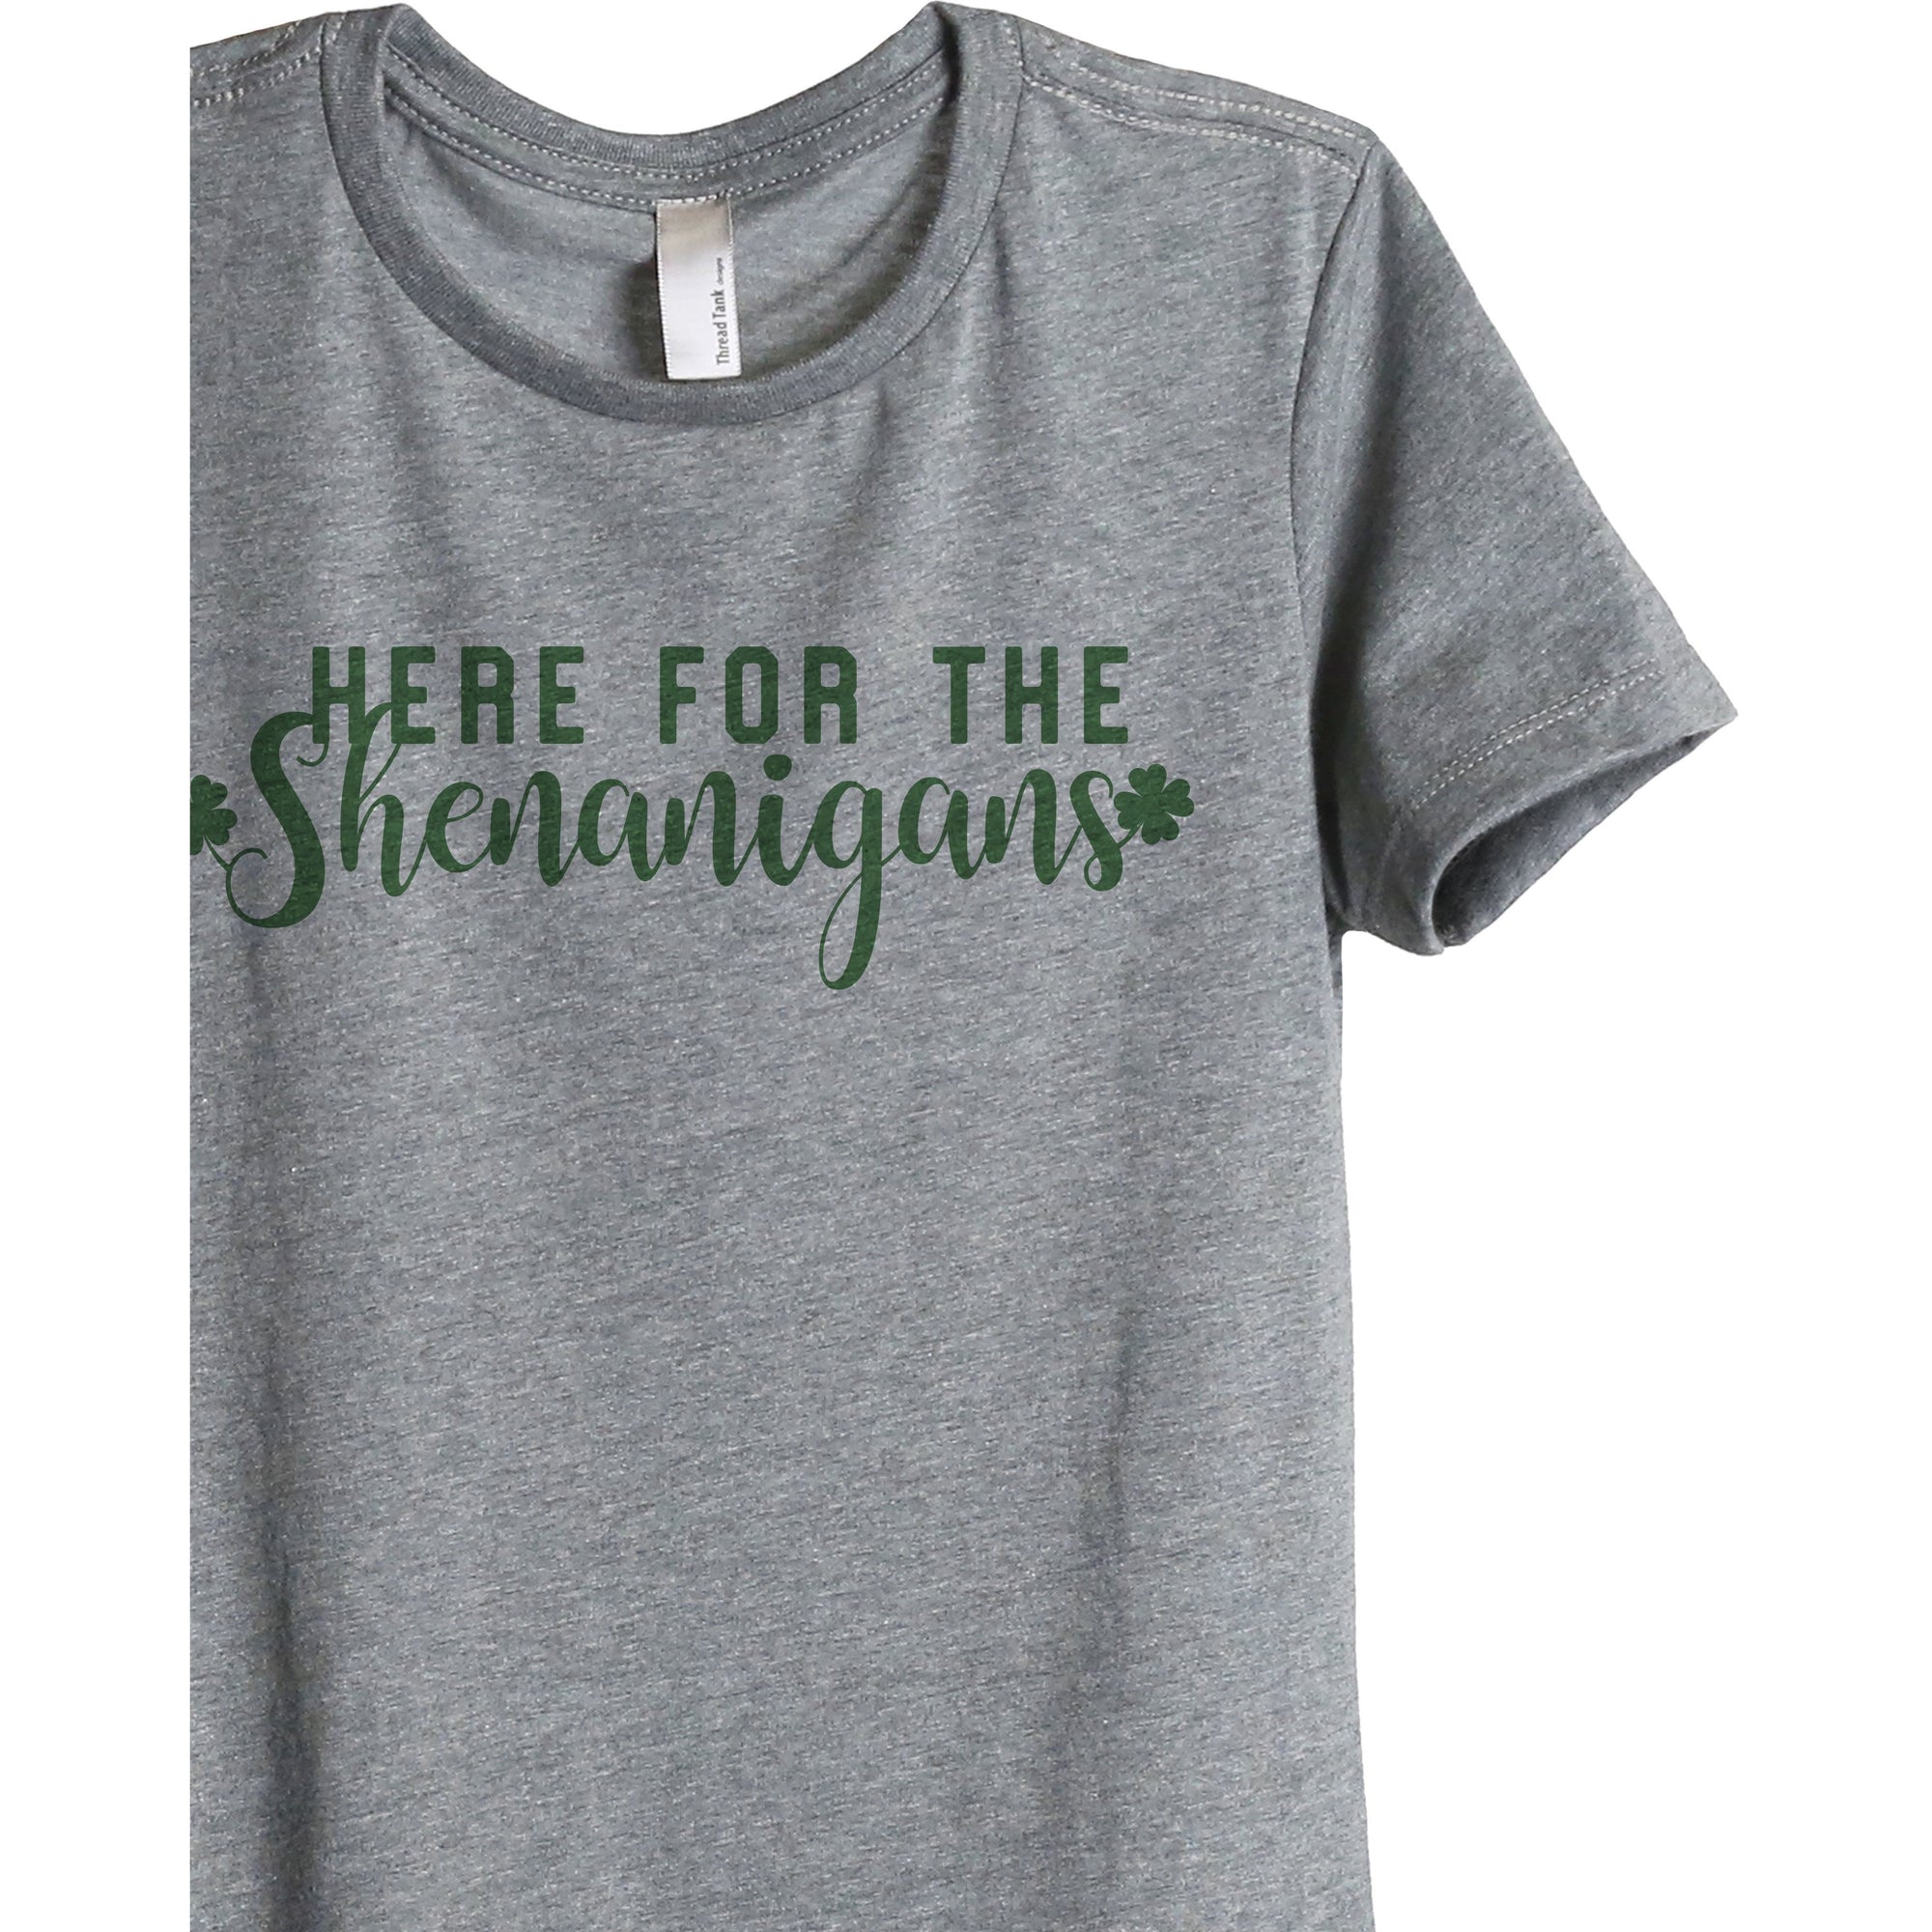 Here For The Shenanigans Women's Relaxed Crewneck T-Shirt Top Tee Heather Grey Exclusive Green